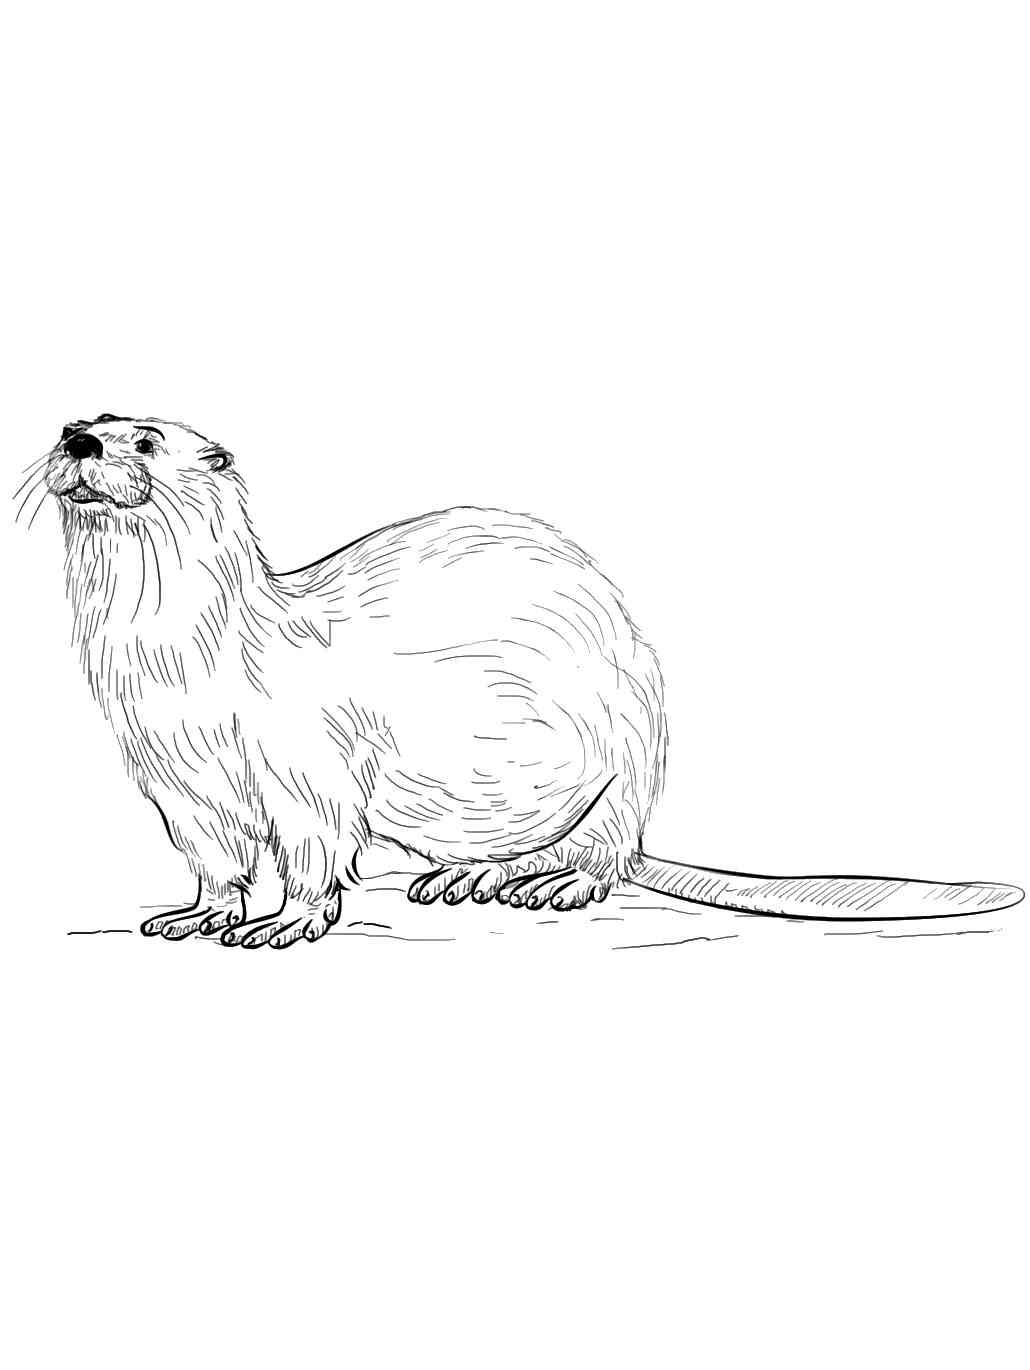 River Otter coloring page